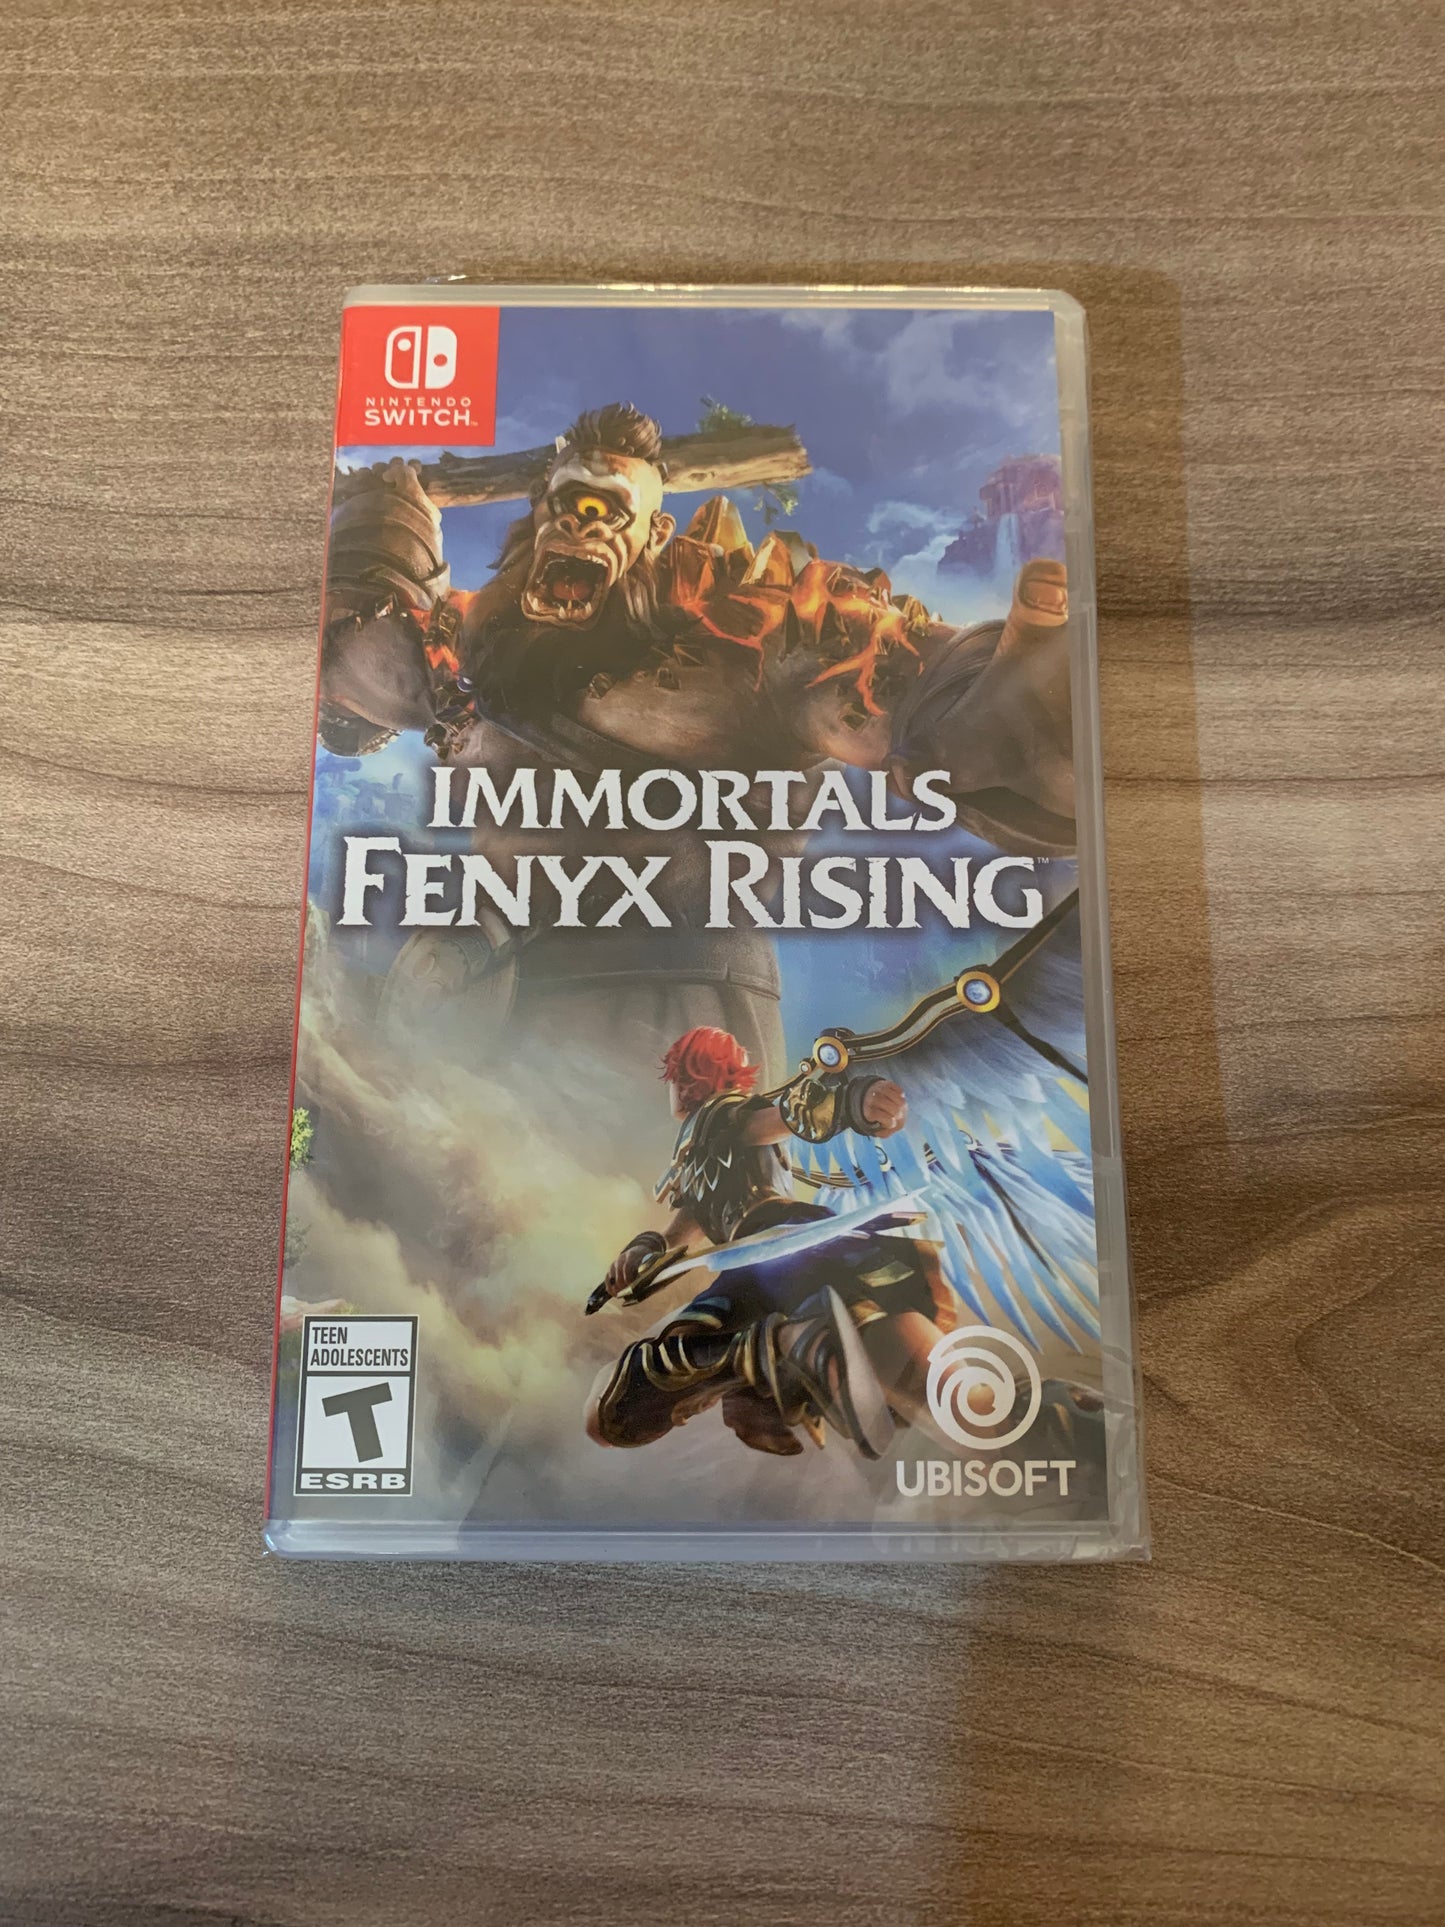 PiXEL-RETRO.COM : NINTENDO SWITCH NEW SEALED IN BOX COMPLETE MANUAL GAME NTSC NEW SEALED IMMORTALS FENYX RISING